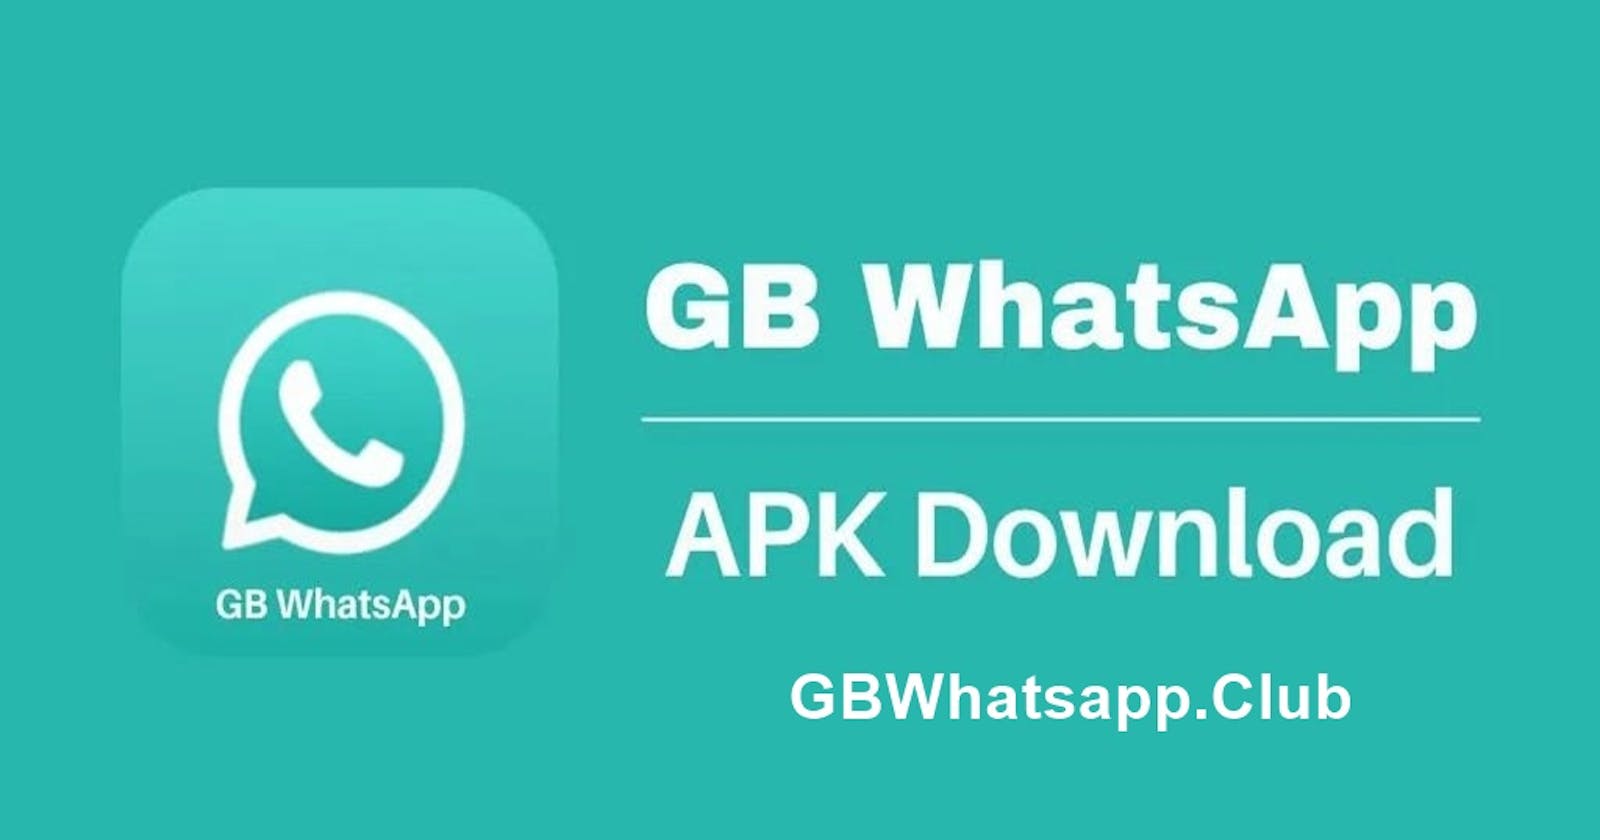 Are there any privacy concerns associated with using GB WhatsApp APK?